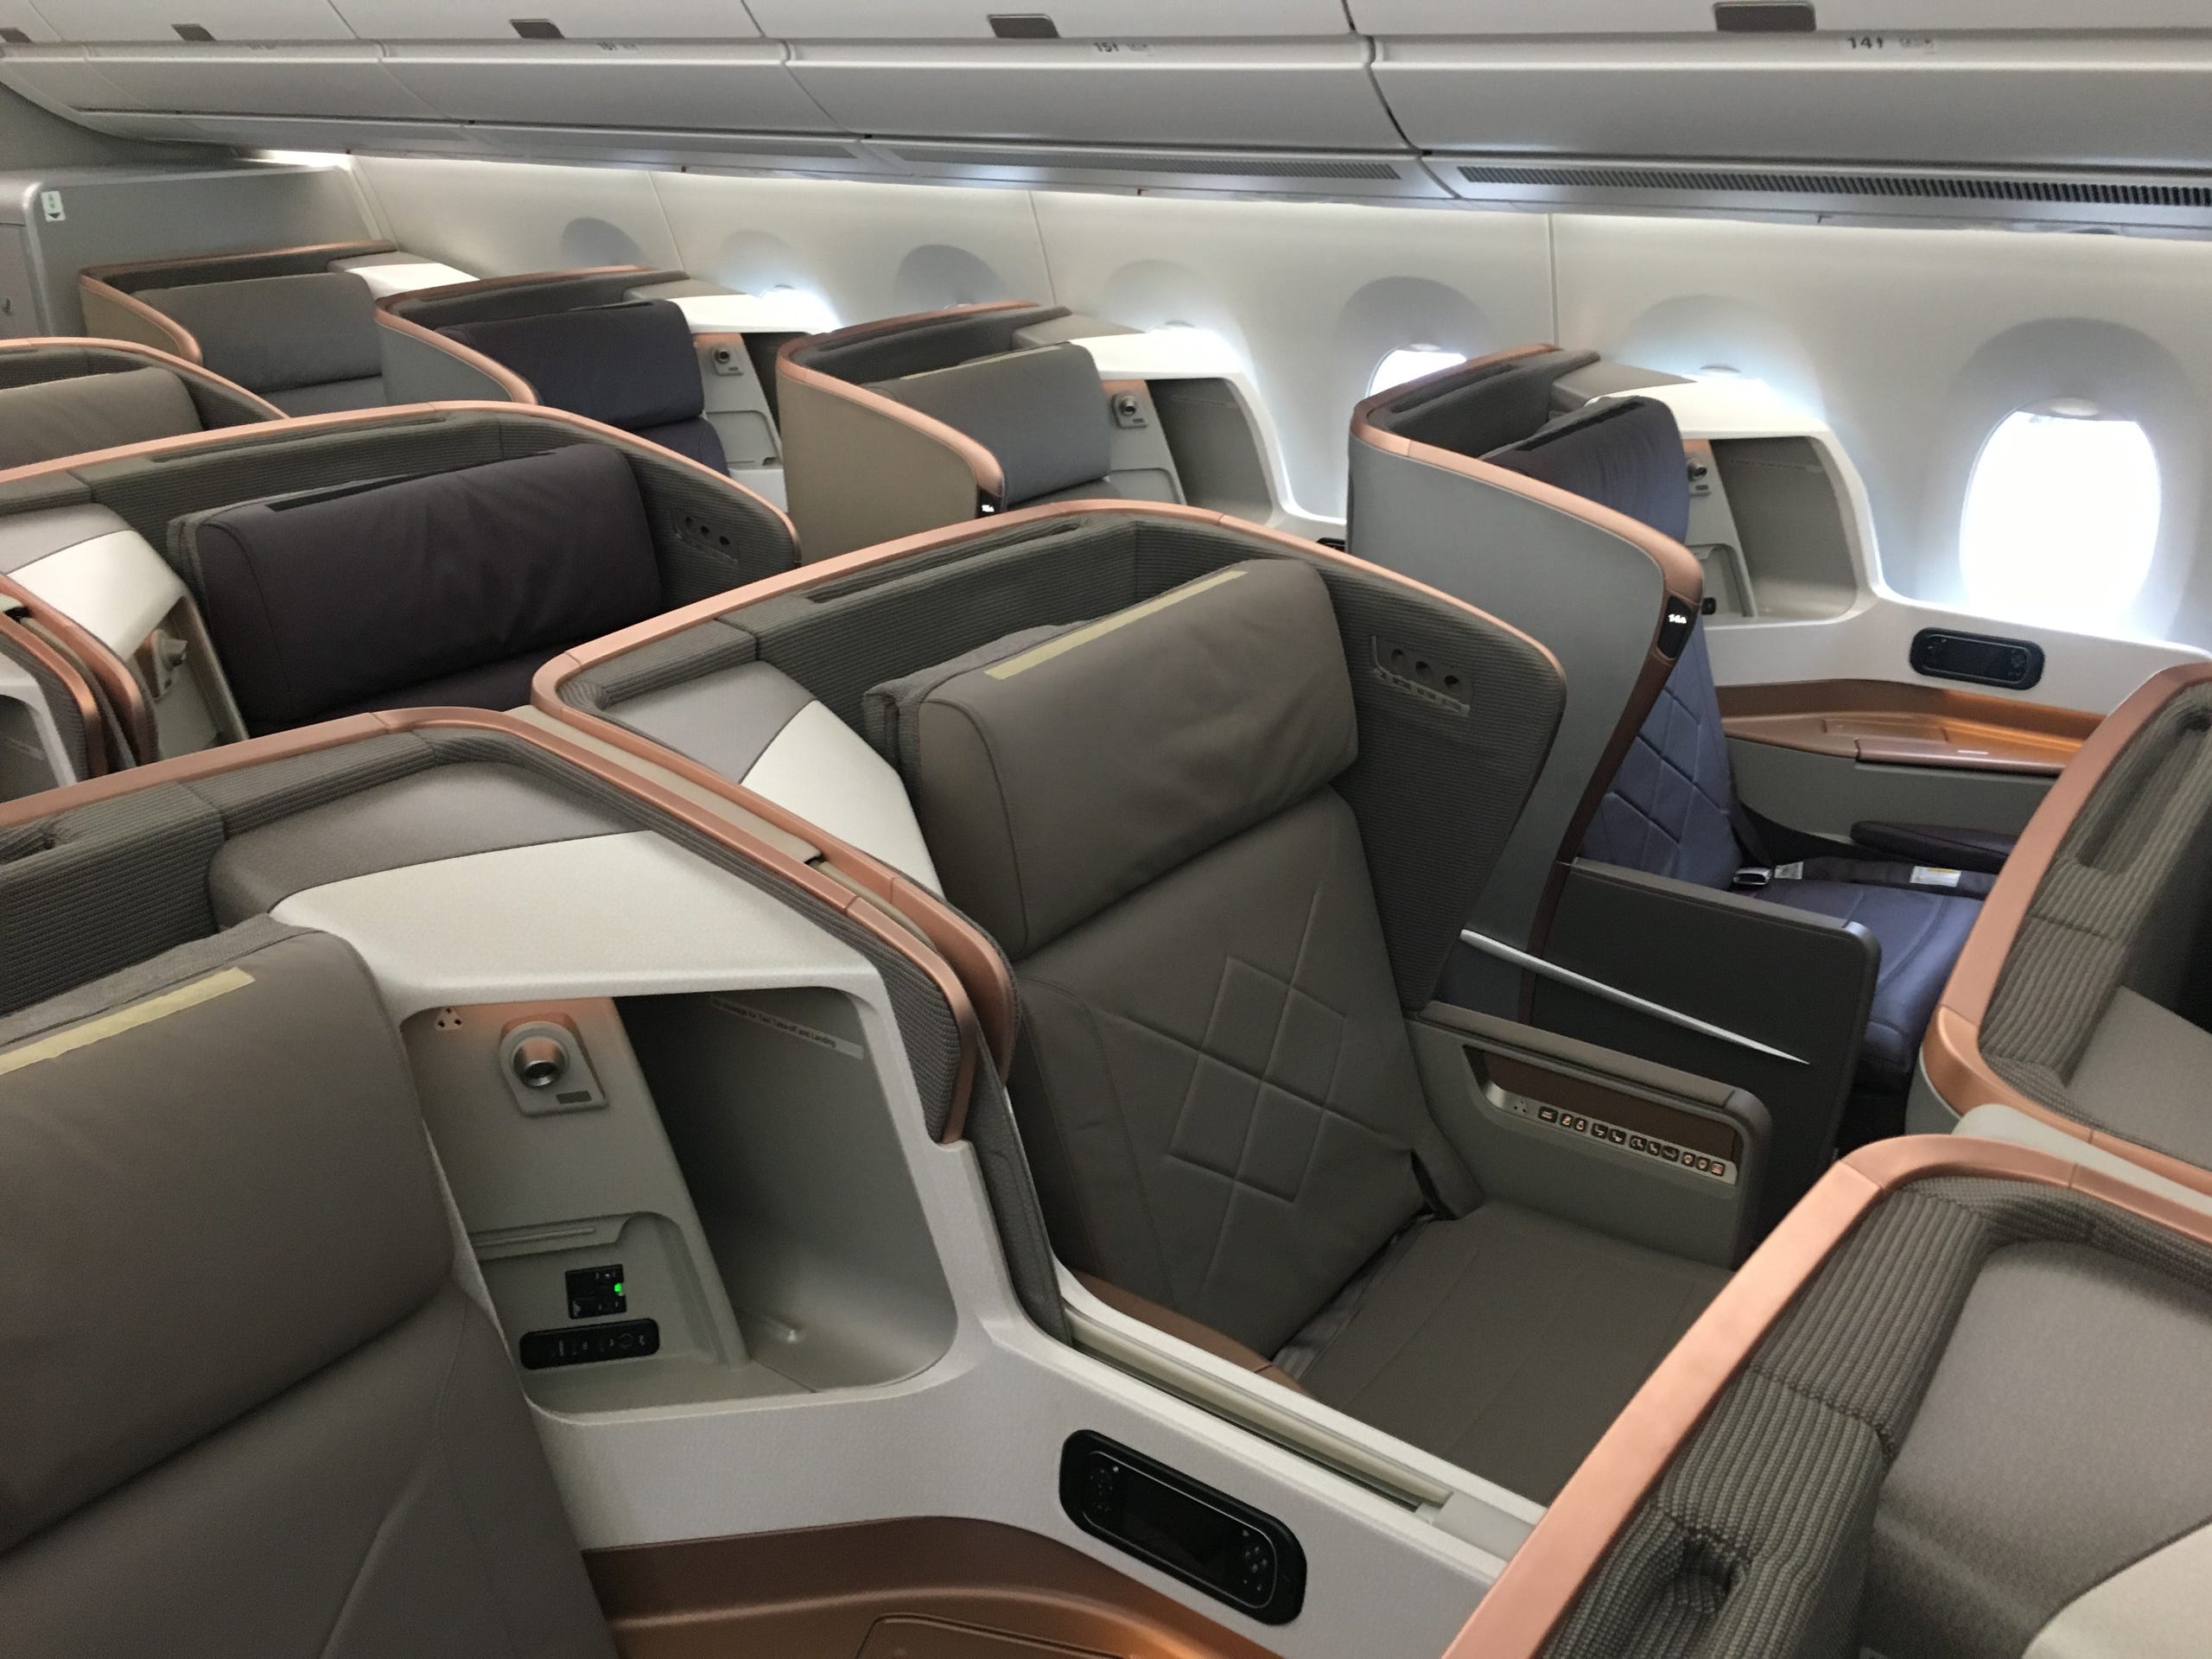 Singapore Airlines Shows Off Its Swanky New Airbus A350 In